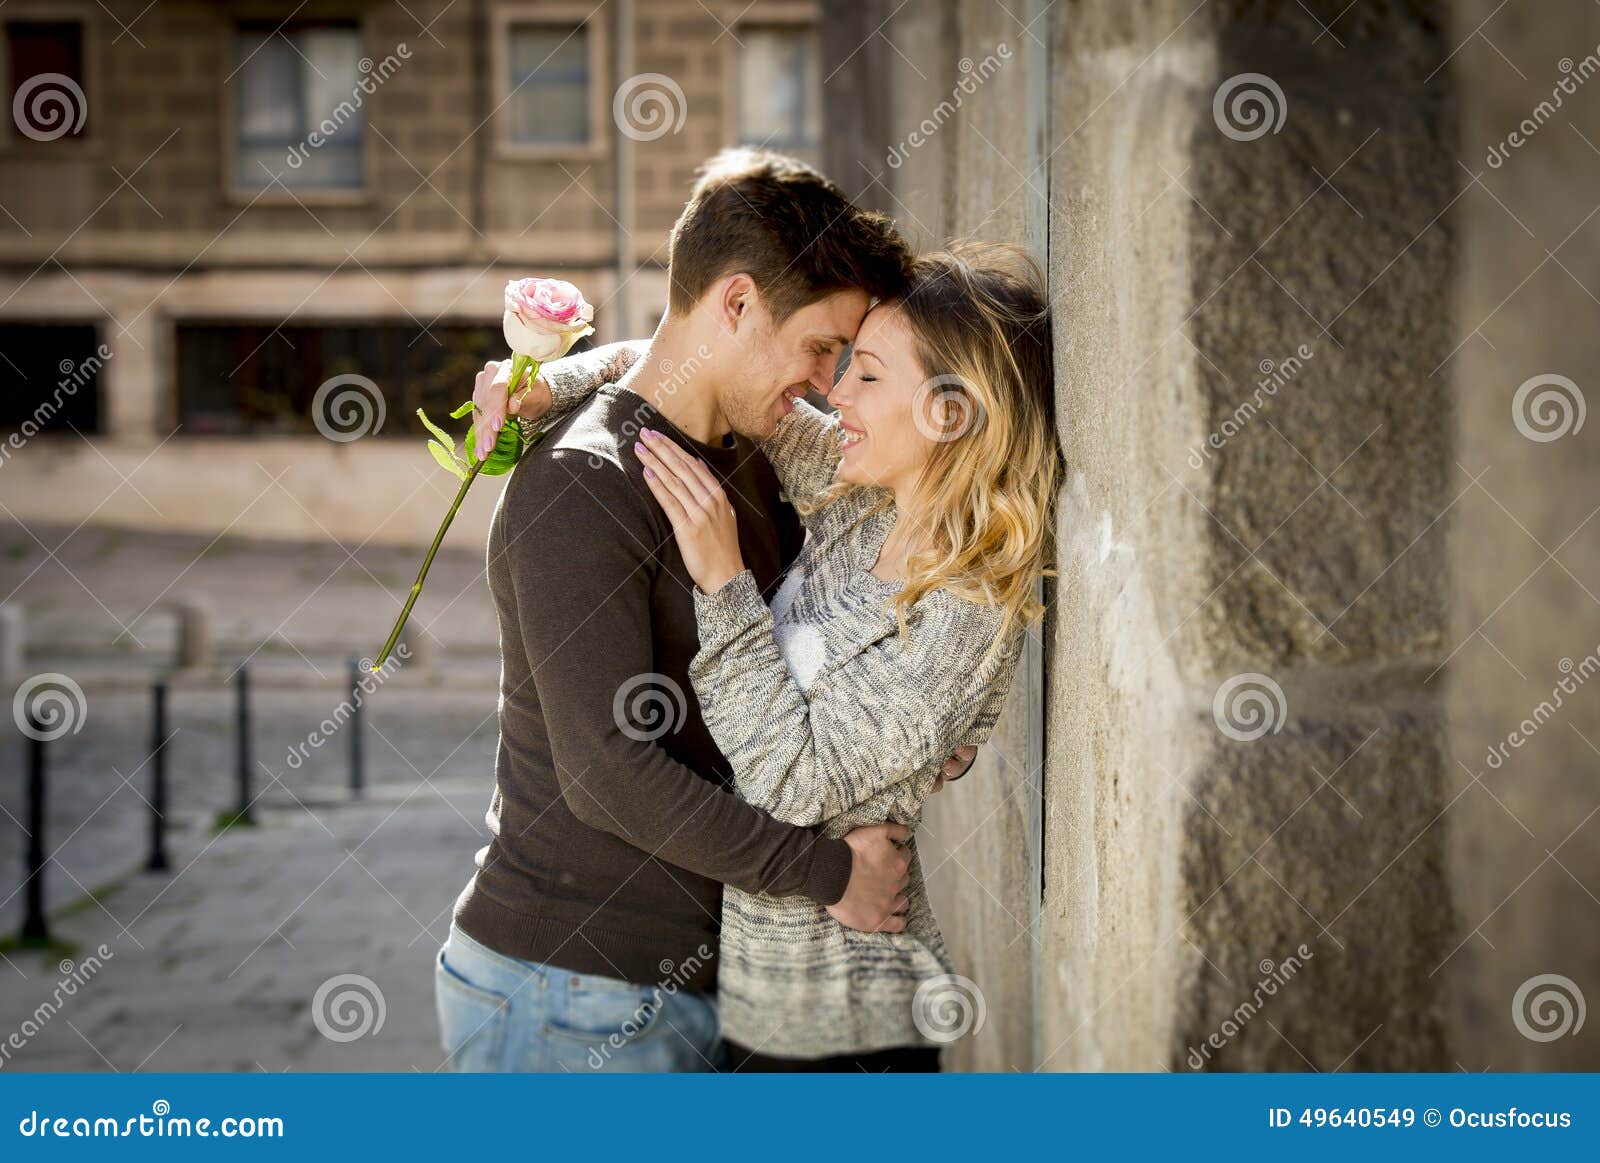 https://thumbs.dreamstime.com/z/candid-portrait-beautiful-european-couple-rose-love-kissing-street-alley-celebrating-valentines-day-romantic-49640549.jpg